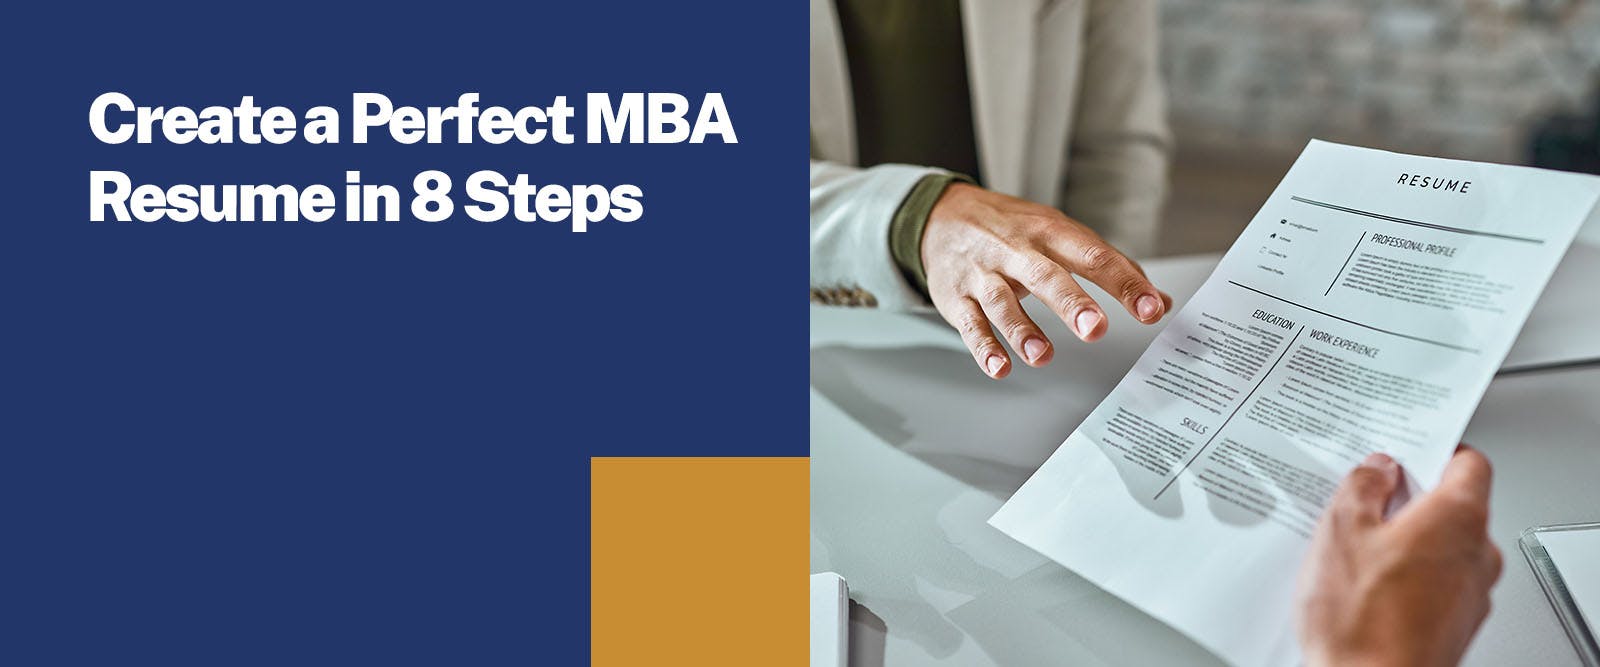 Create a Perfect MBA Resume in 8 Steps